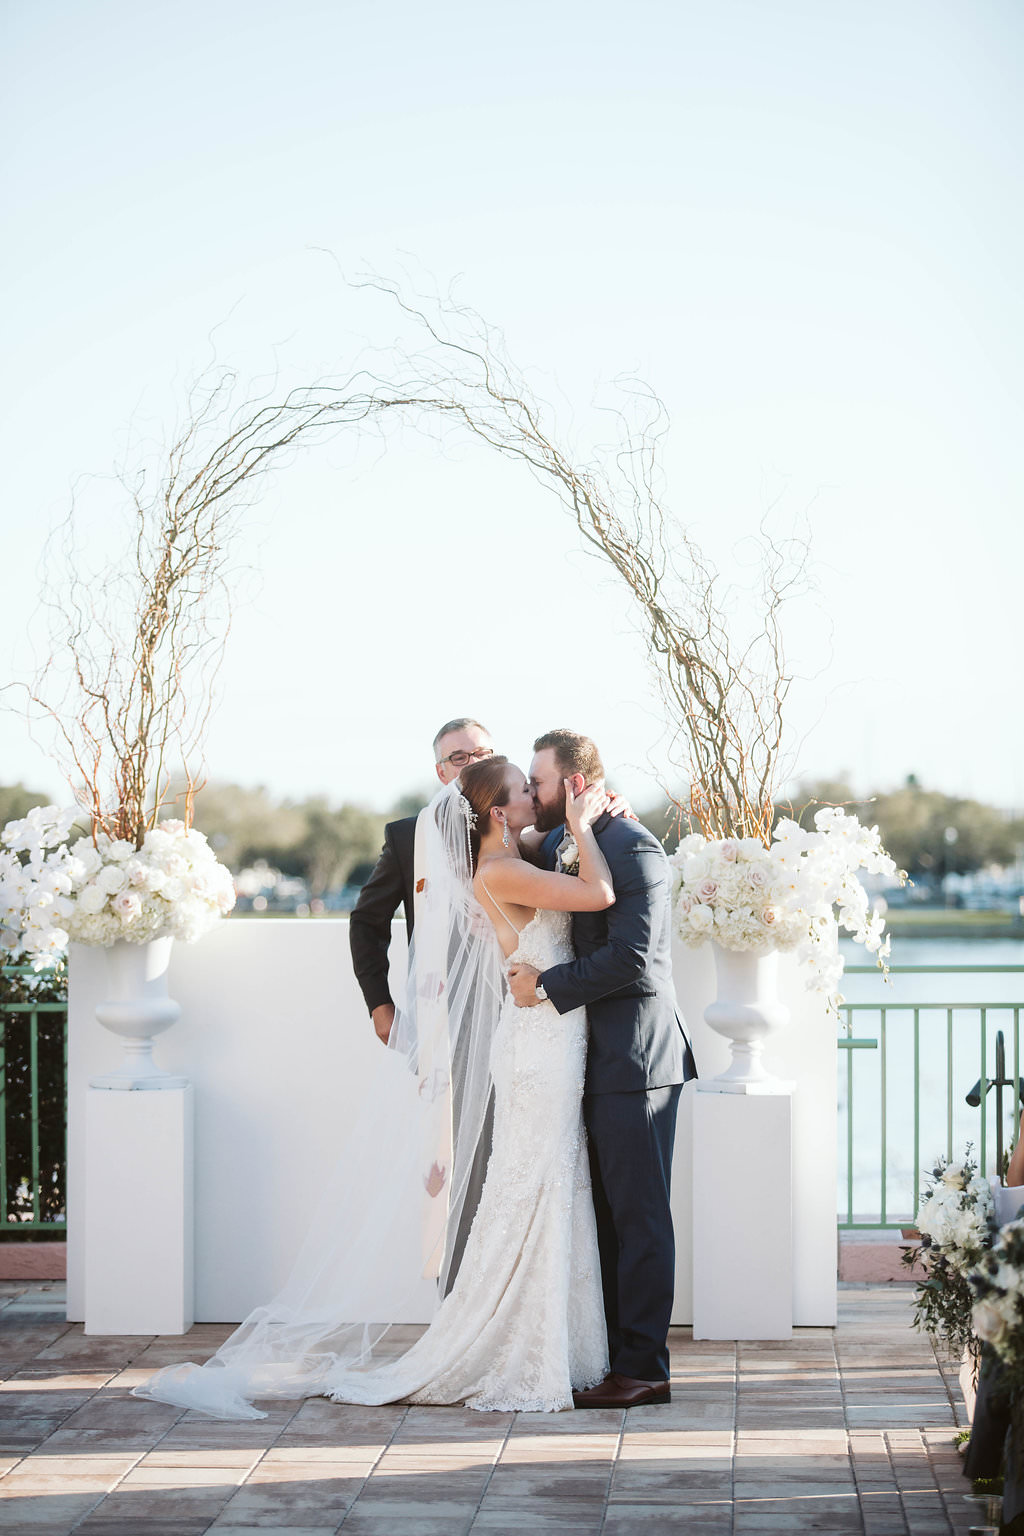 Outdoor Lawn Florida Wedding Ceremony with manzanita branches arch decor and white flowers | Historic Downtown Hotel Venue St. Pete Vinoy Renaissance | Tampa Bay Planner Parties a la Carte